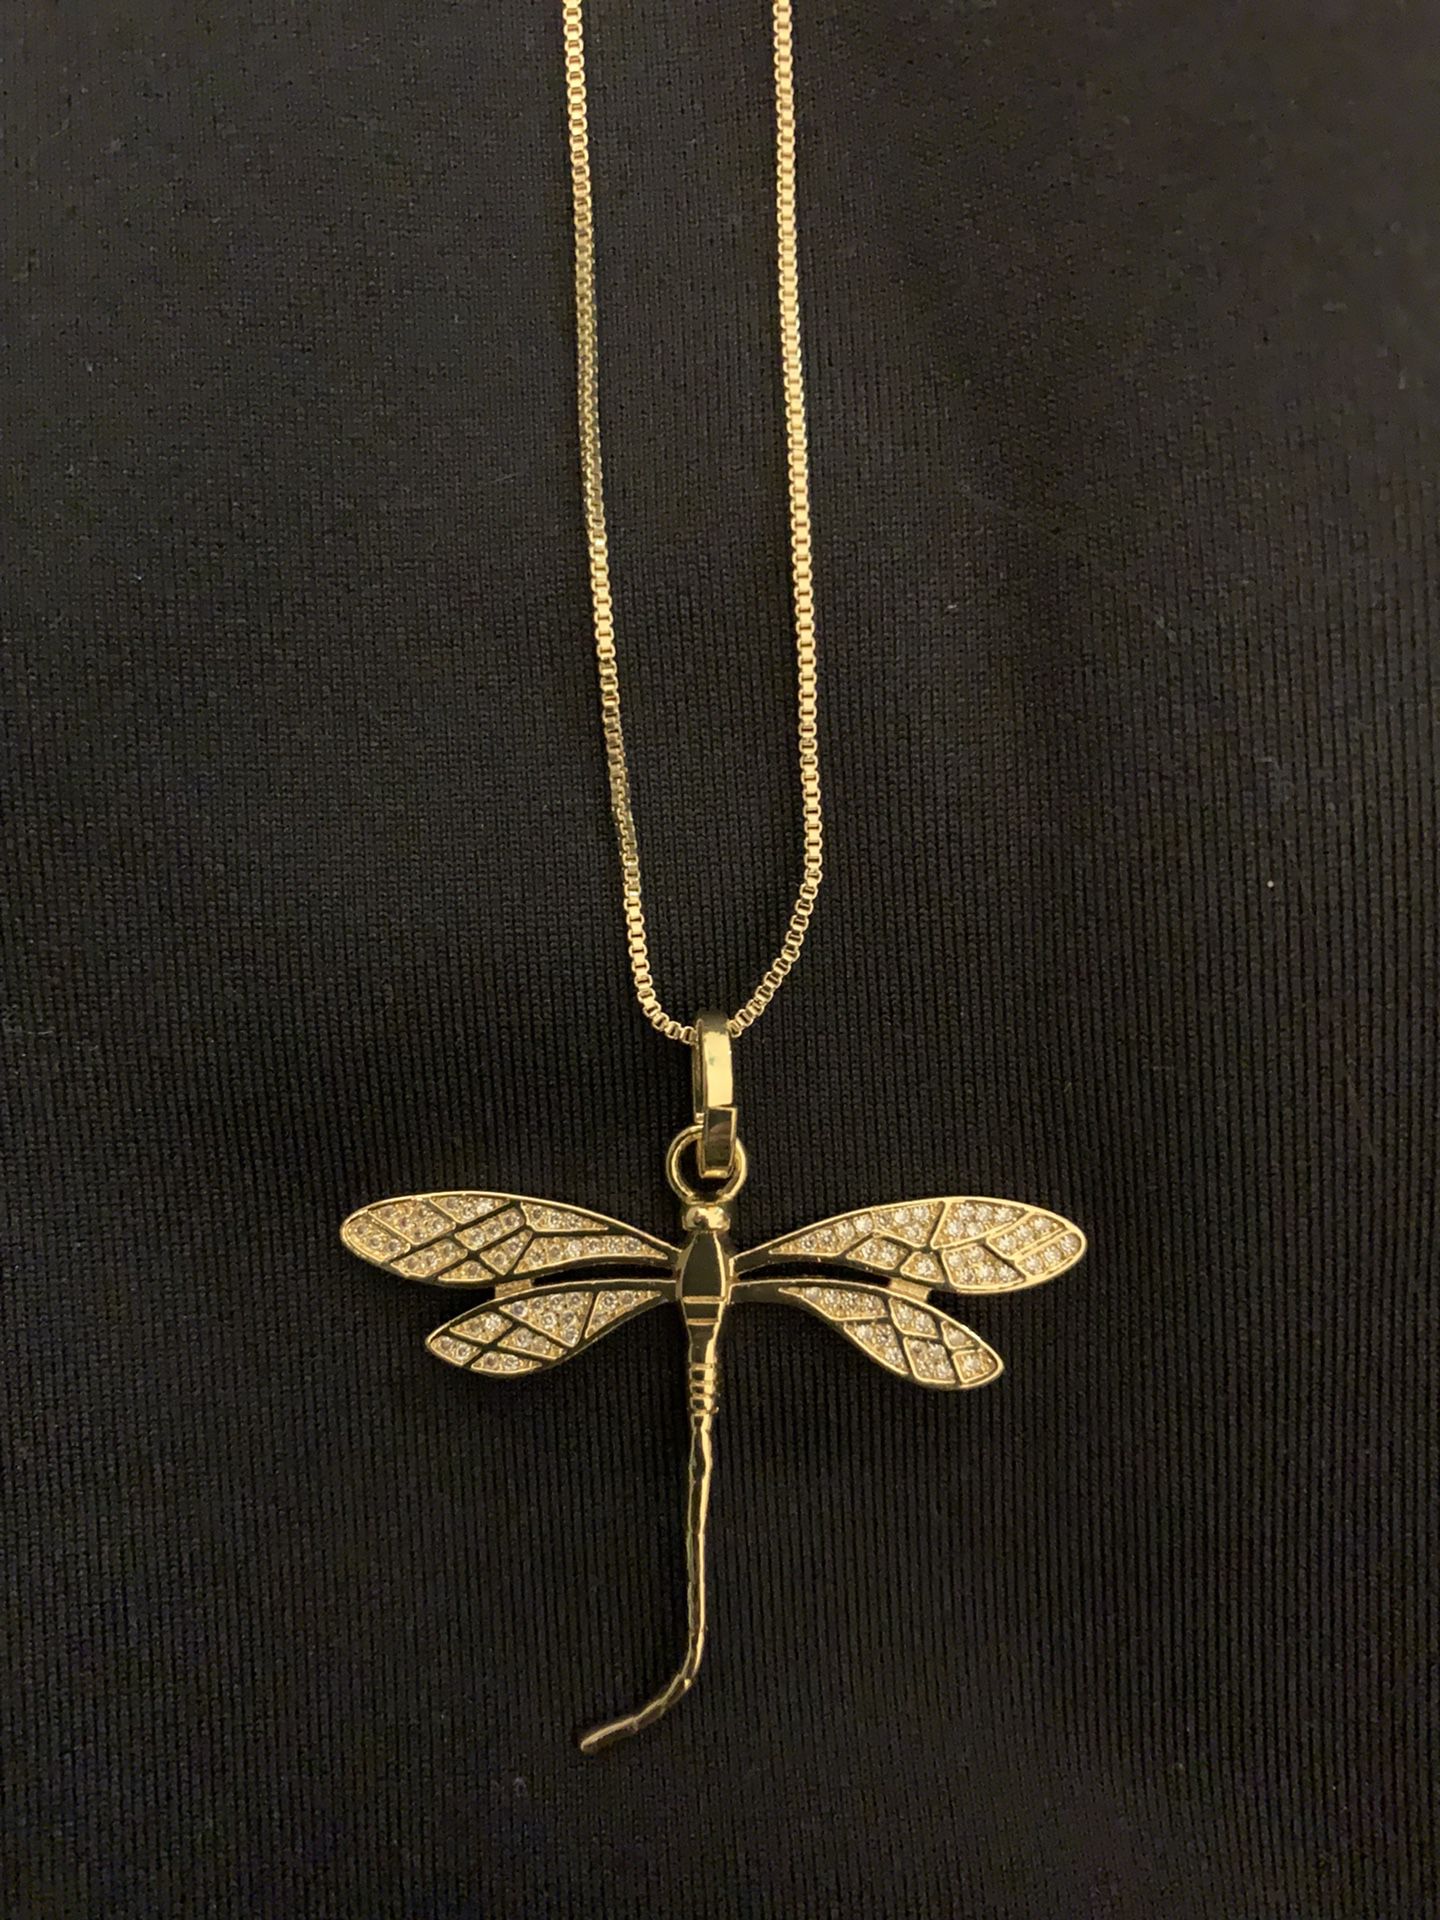 Chain With Dragonfly